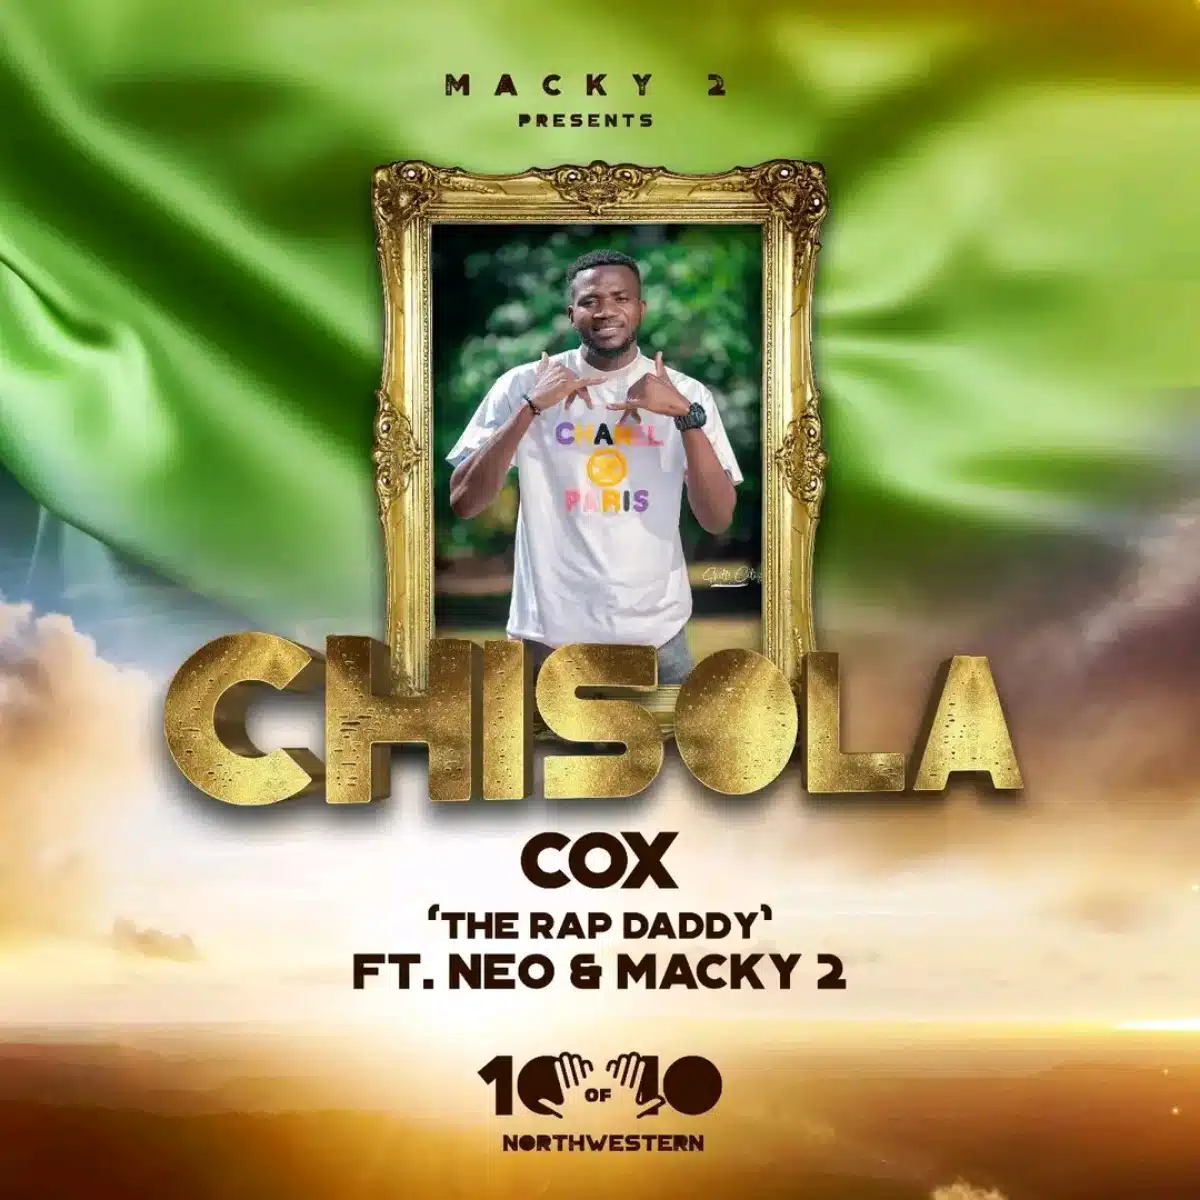 DOWNLOAD: COX Ft Macky 2 & Neo – “Chisola” (Video & Audio) Mp3